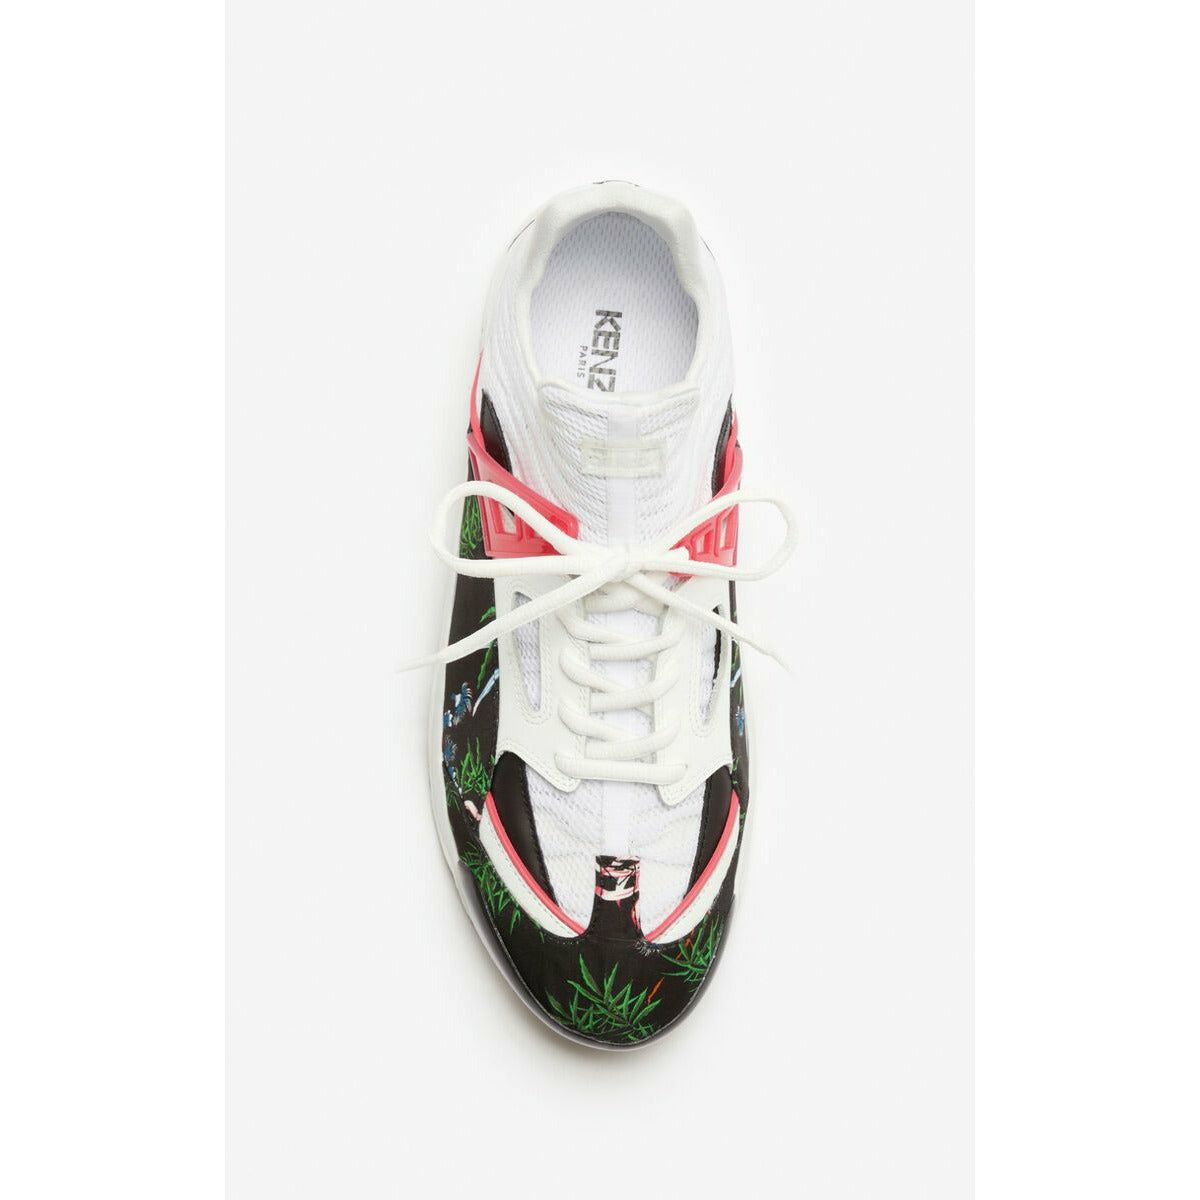 SEA LILY' SONIC SNEAKERS - Yooto